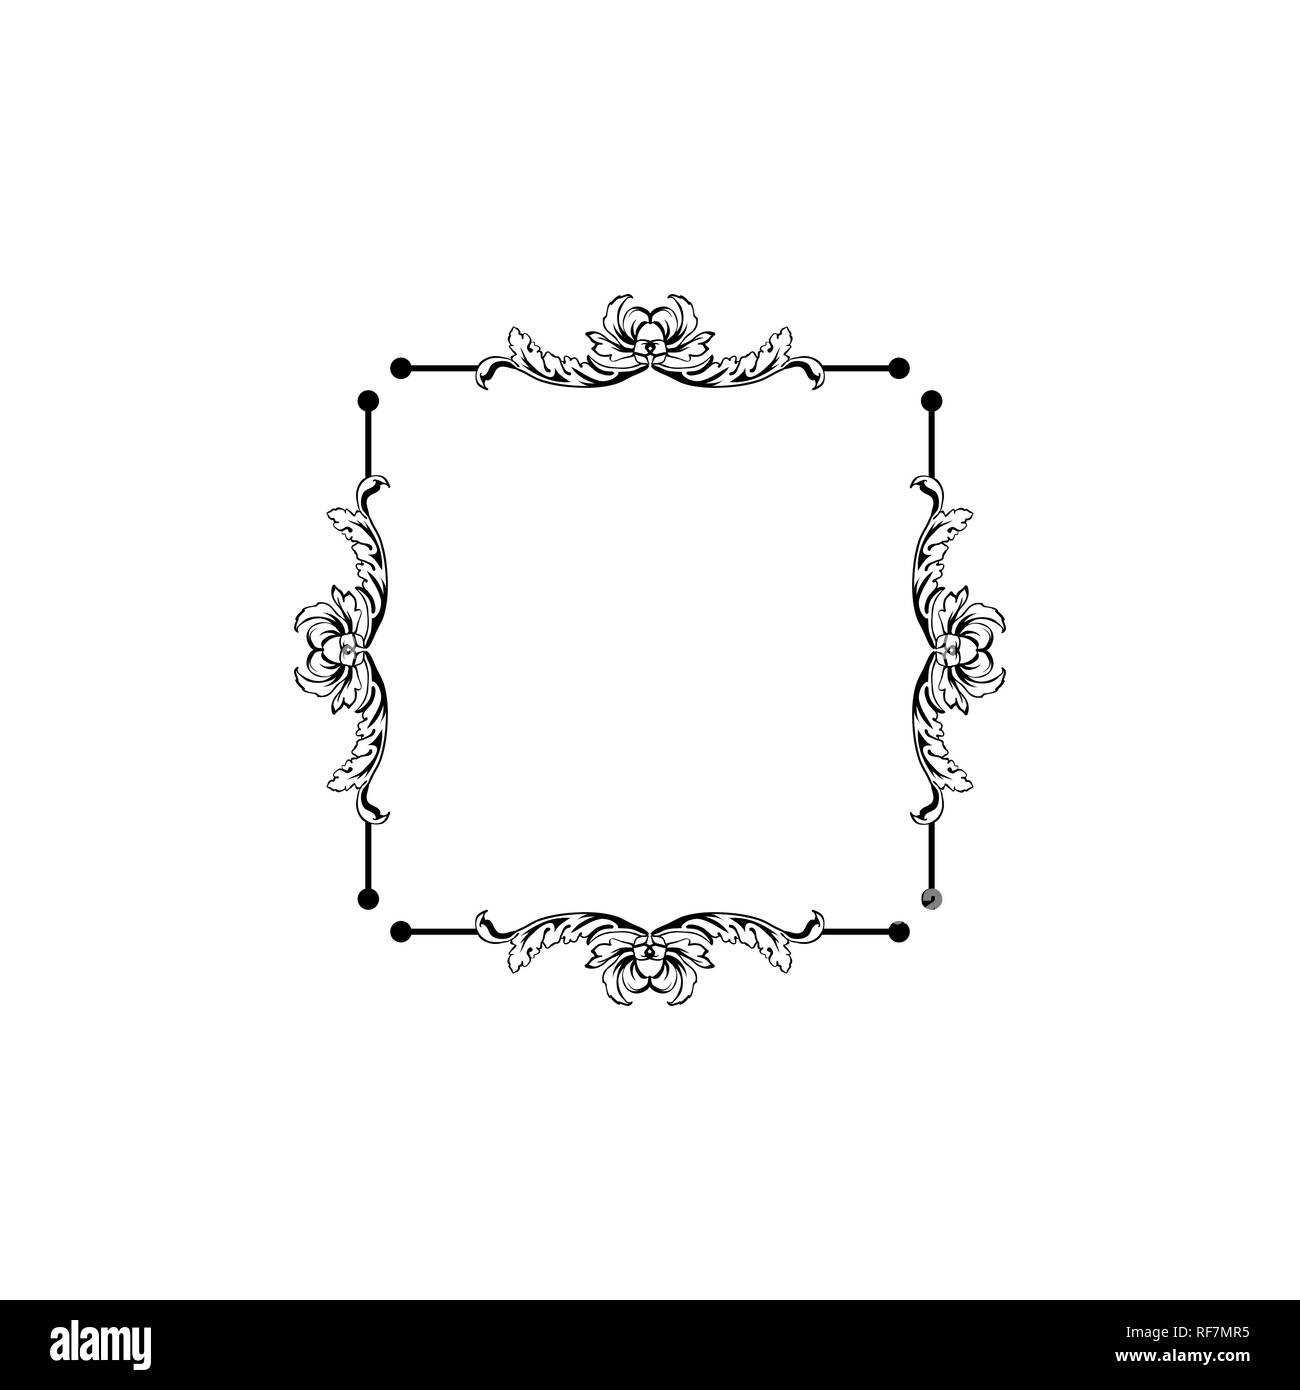 Floral vintage decorative vector frame. Flower black ink Square filigree border with text space. Isolated calligraphic frame with copyspace. Invitation, greeting card, poster flourish design element Stock Vector